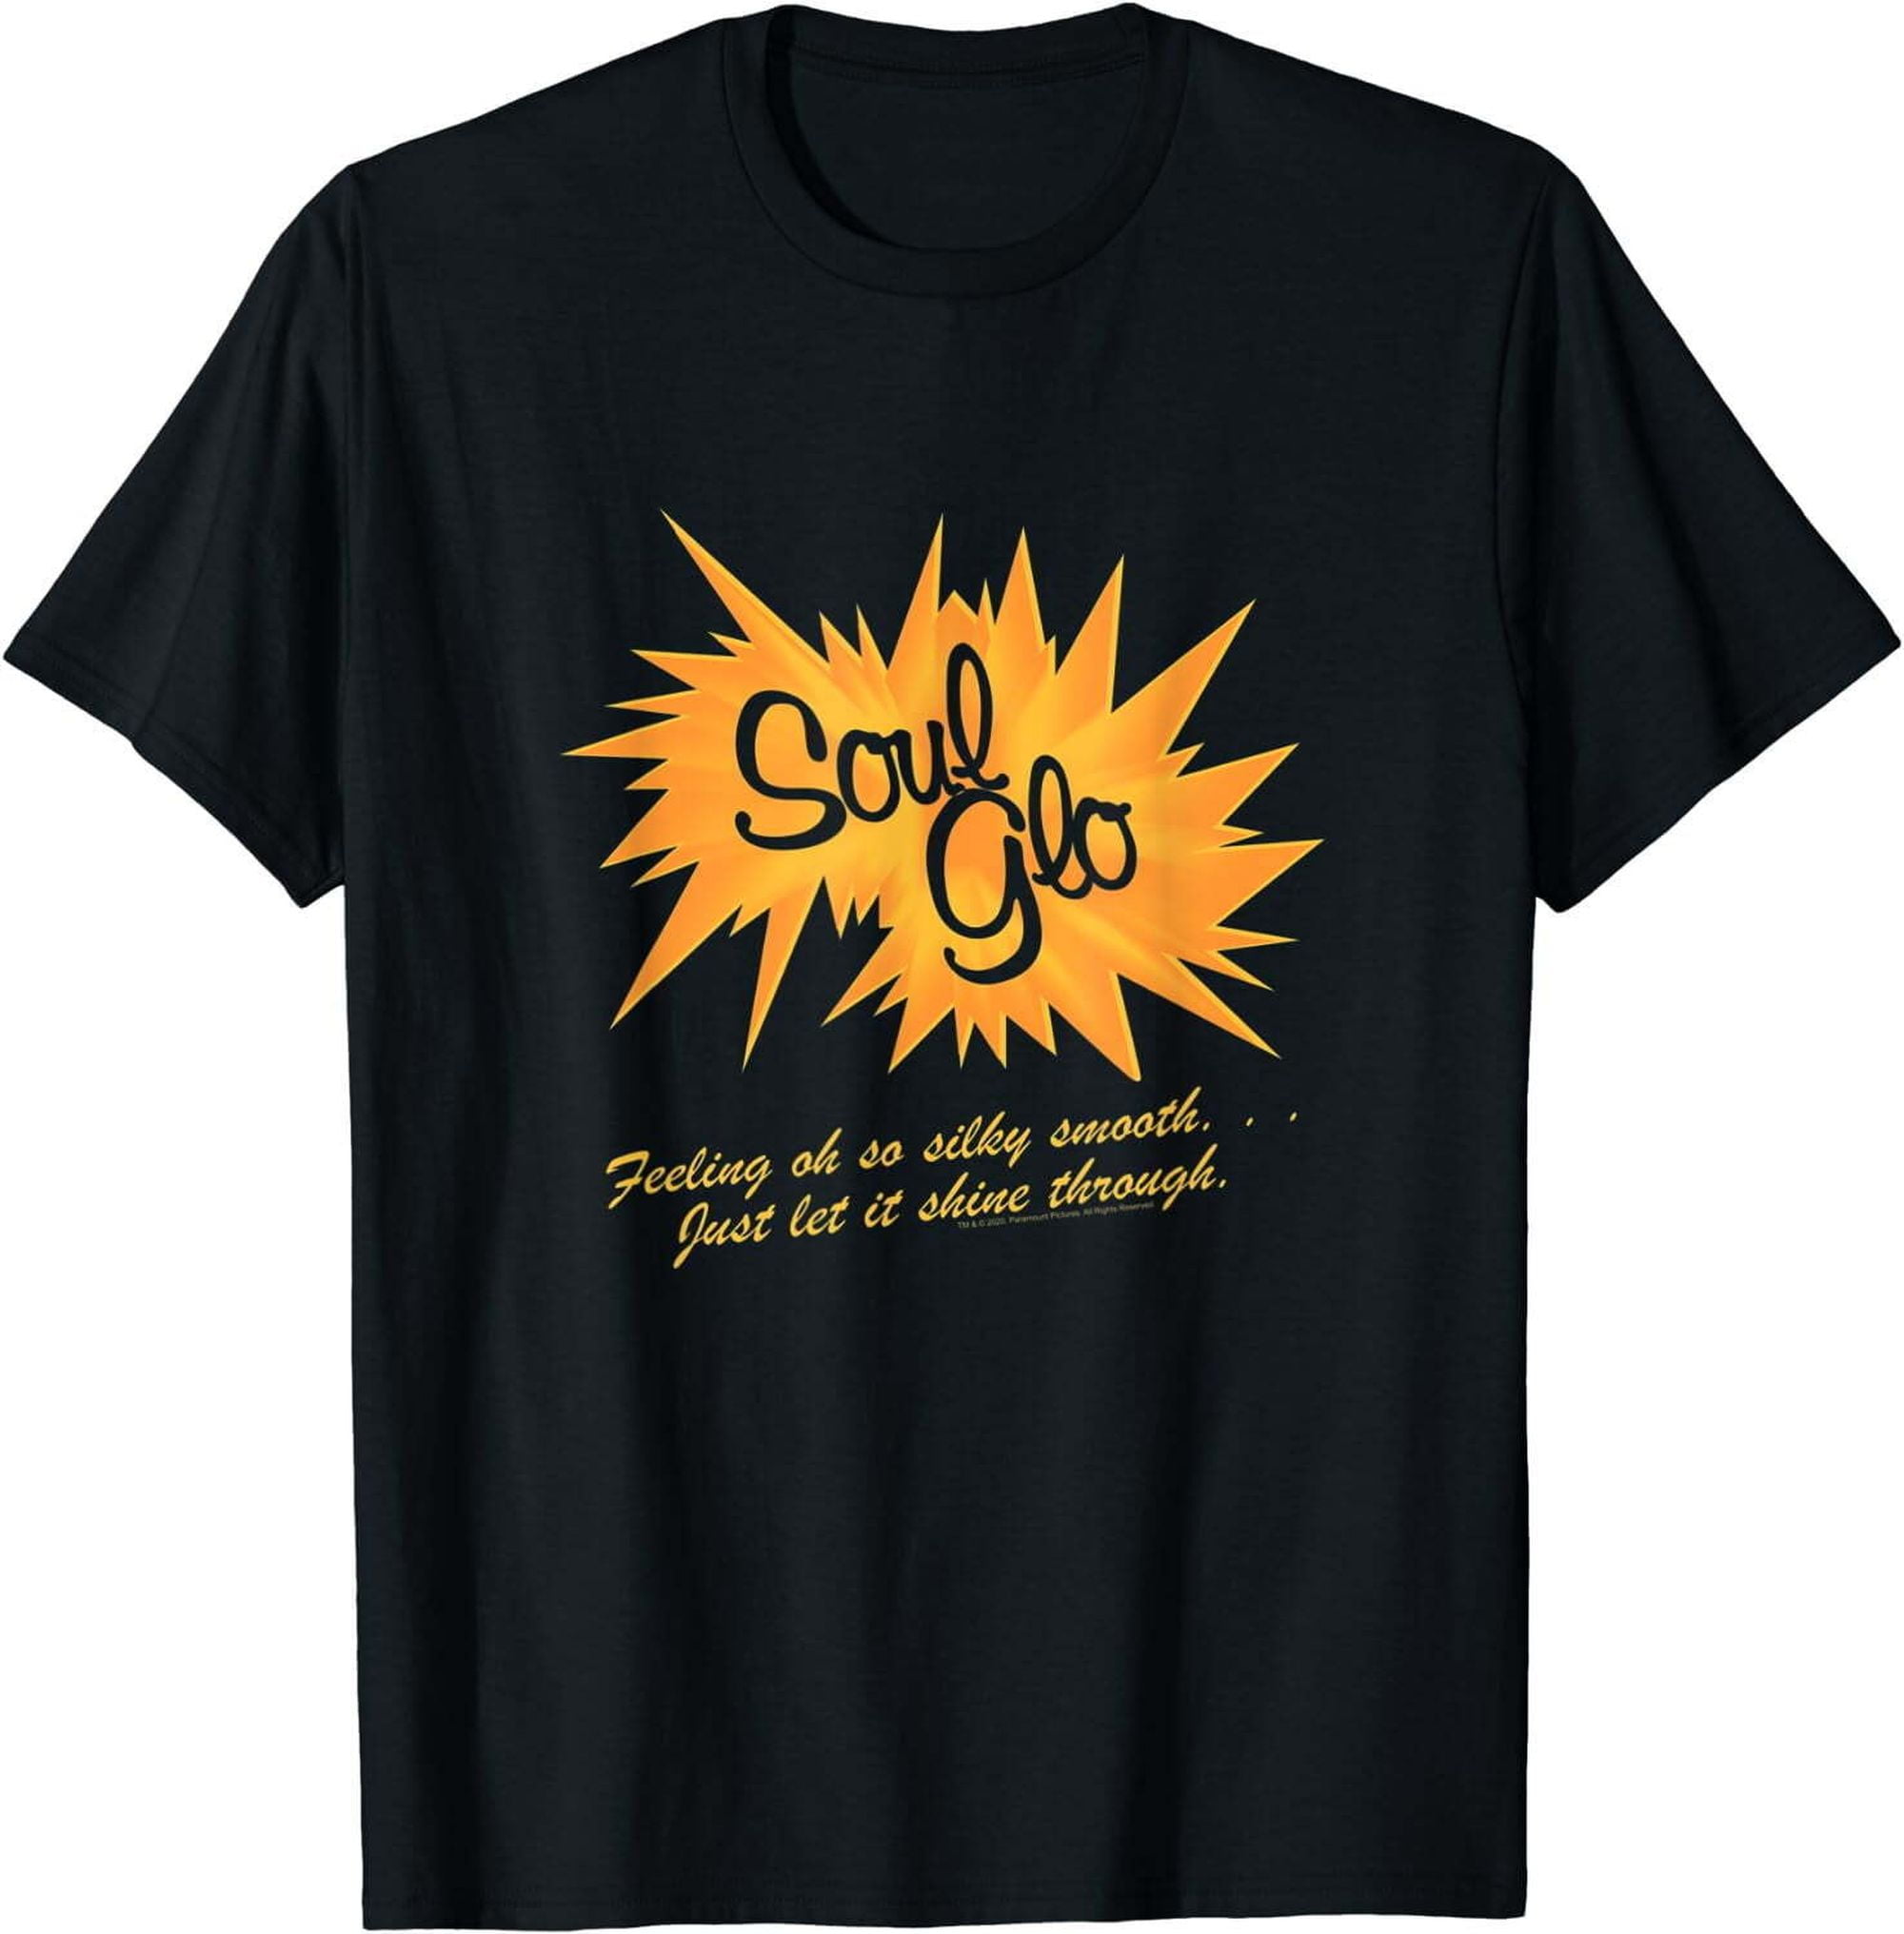 Soul Glo Logo T-Shirt - Classic Black Design Inspired by Coming to ...